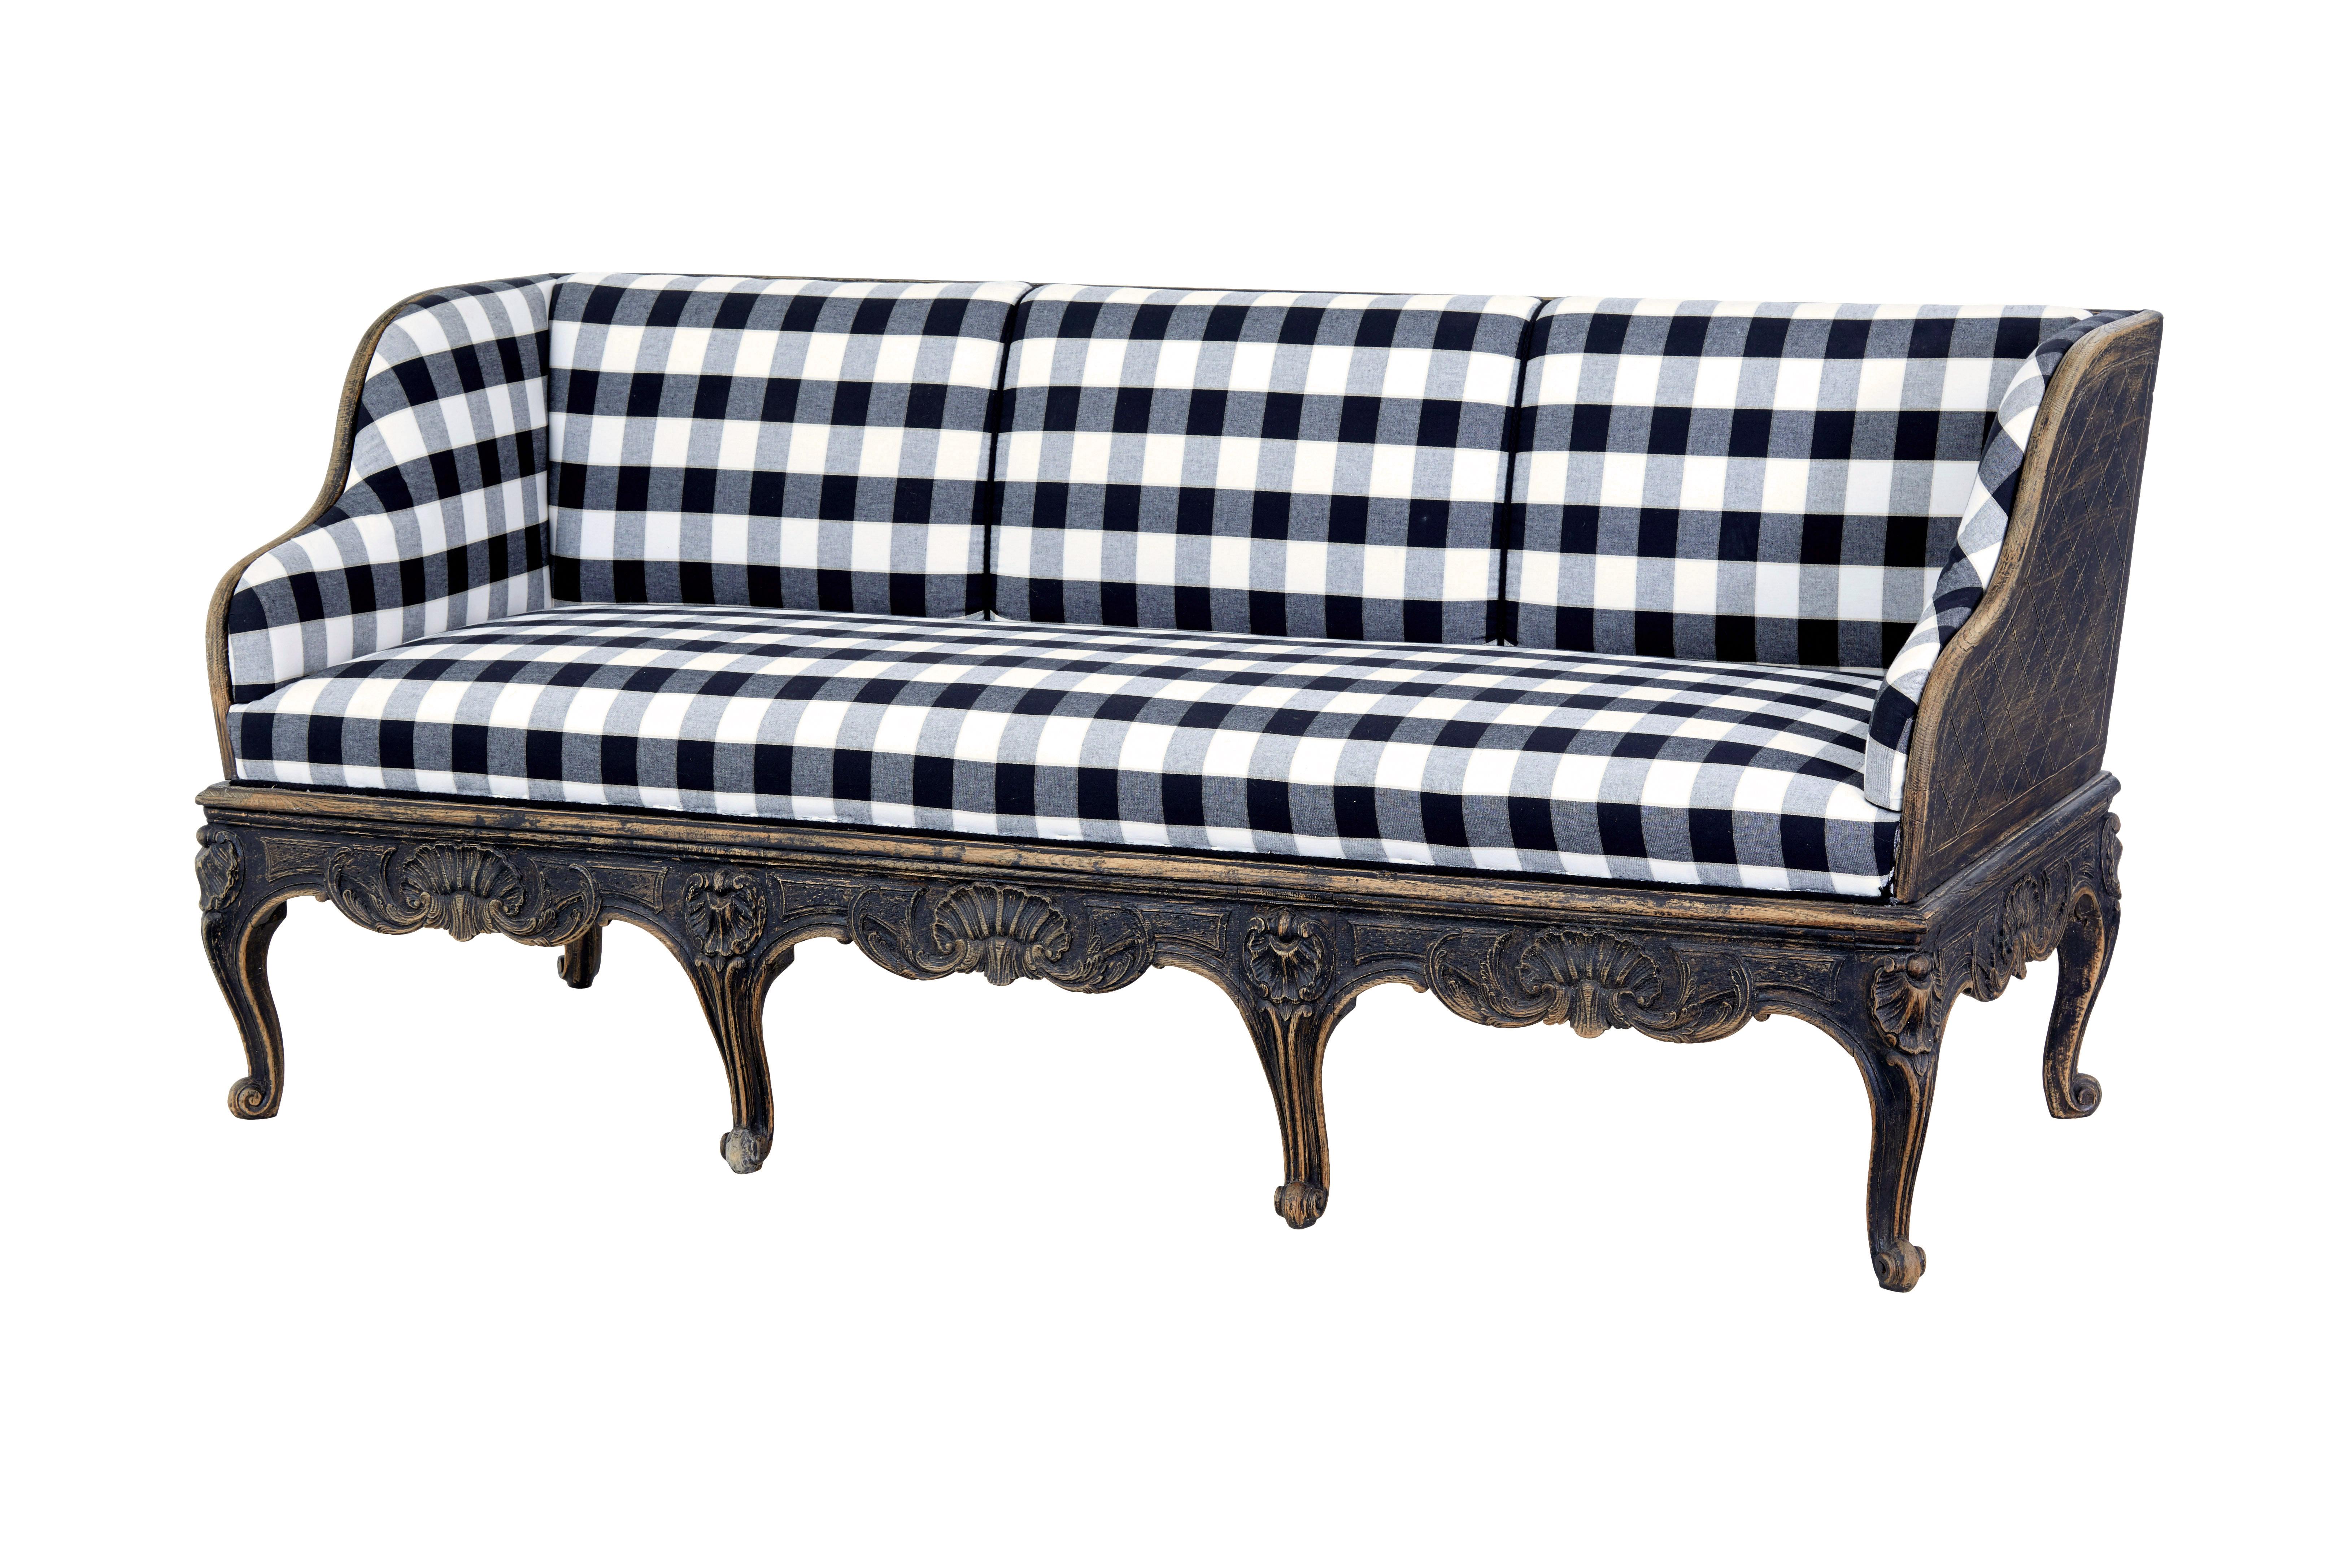 Gustavian Early 19th century carved oak Swedish painted sofa